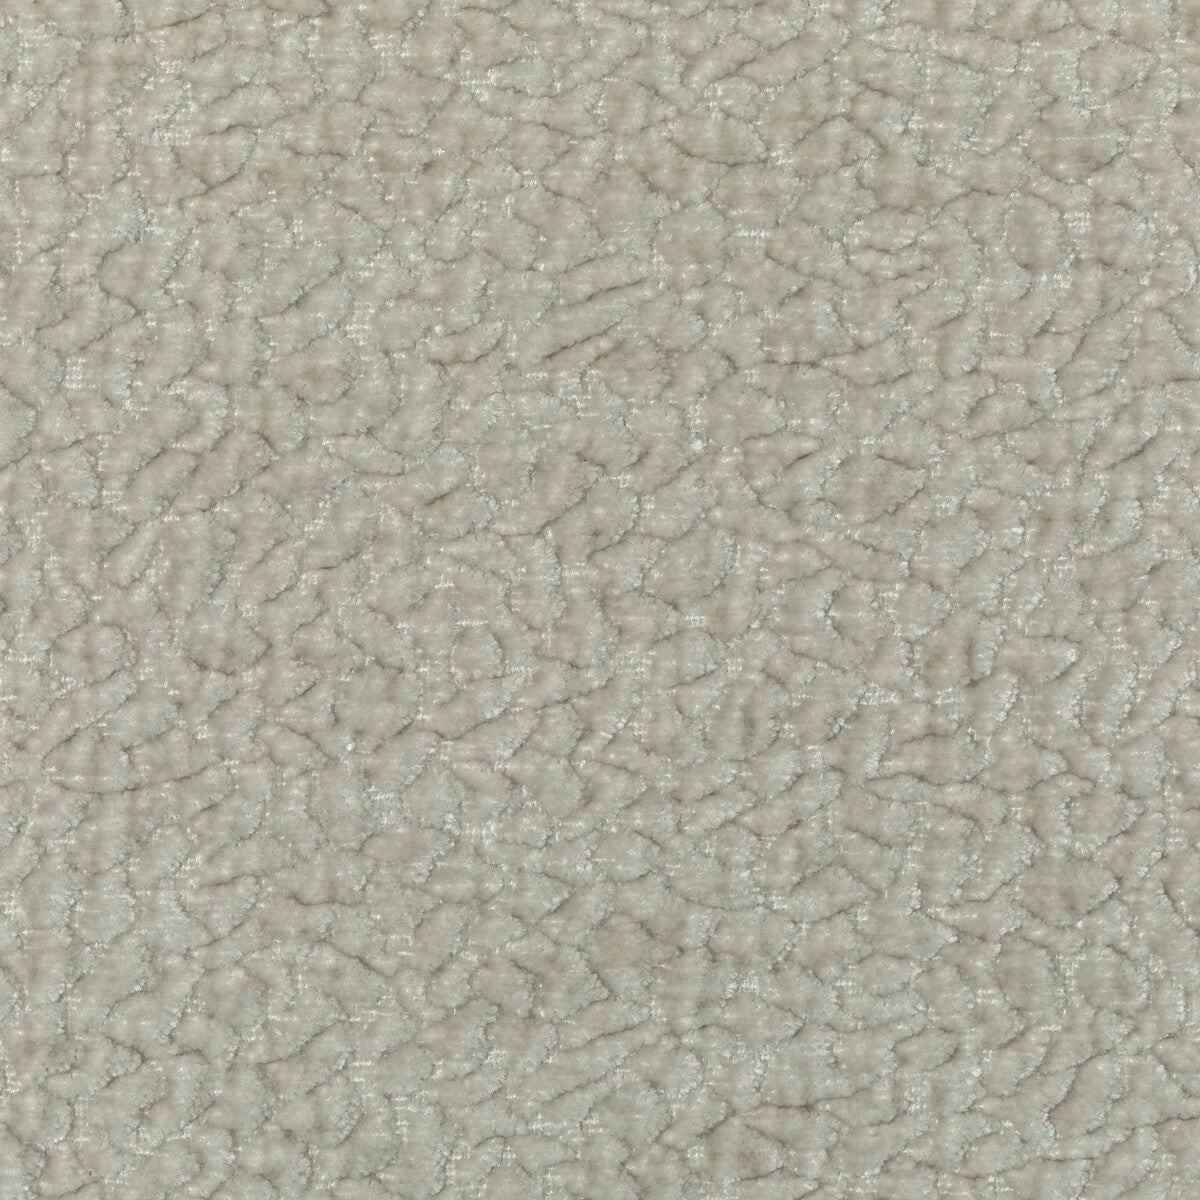 Barton Chenille fabric in dove color - pattern 36074.111.0 - by Kravet Smart